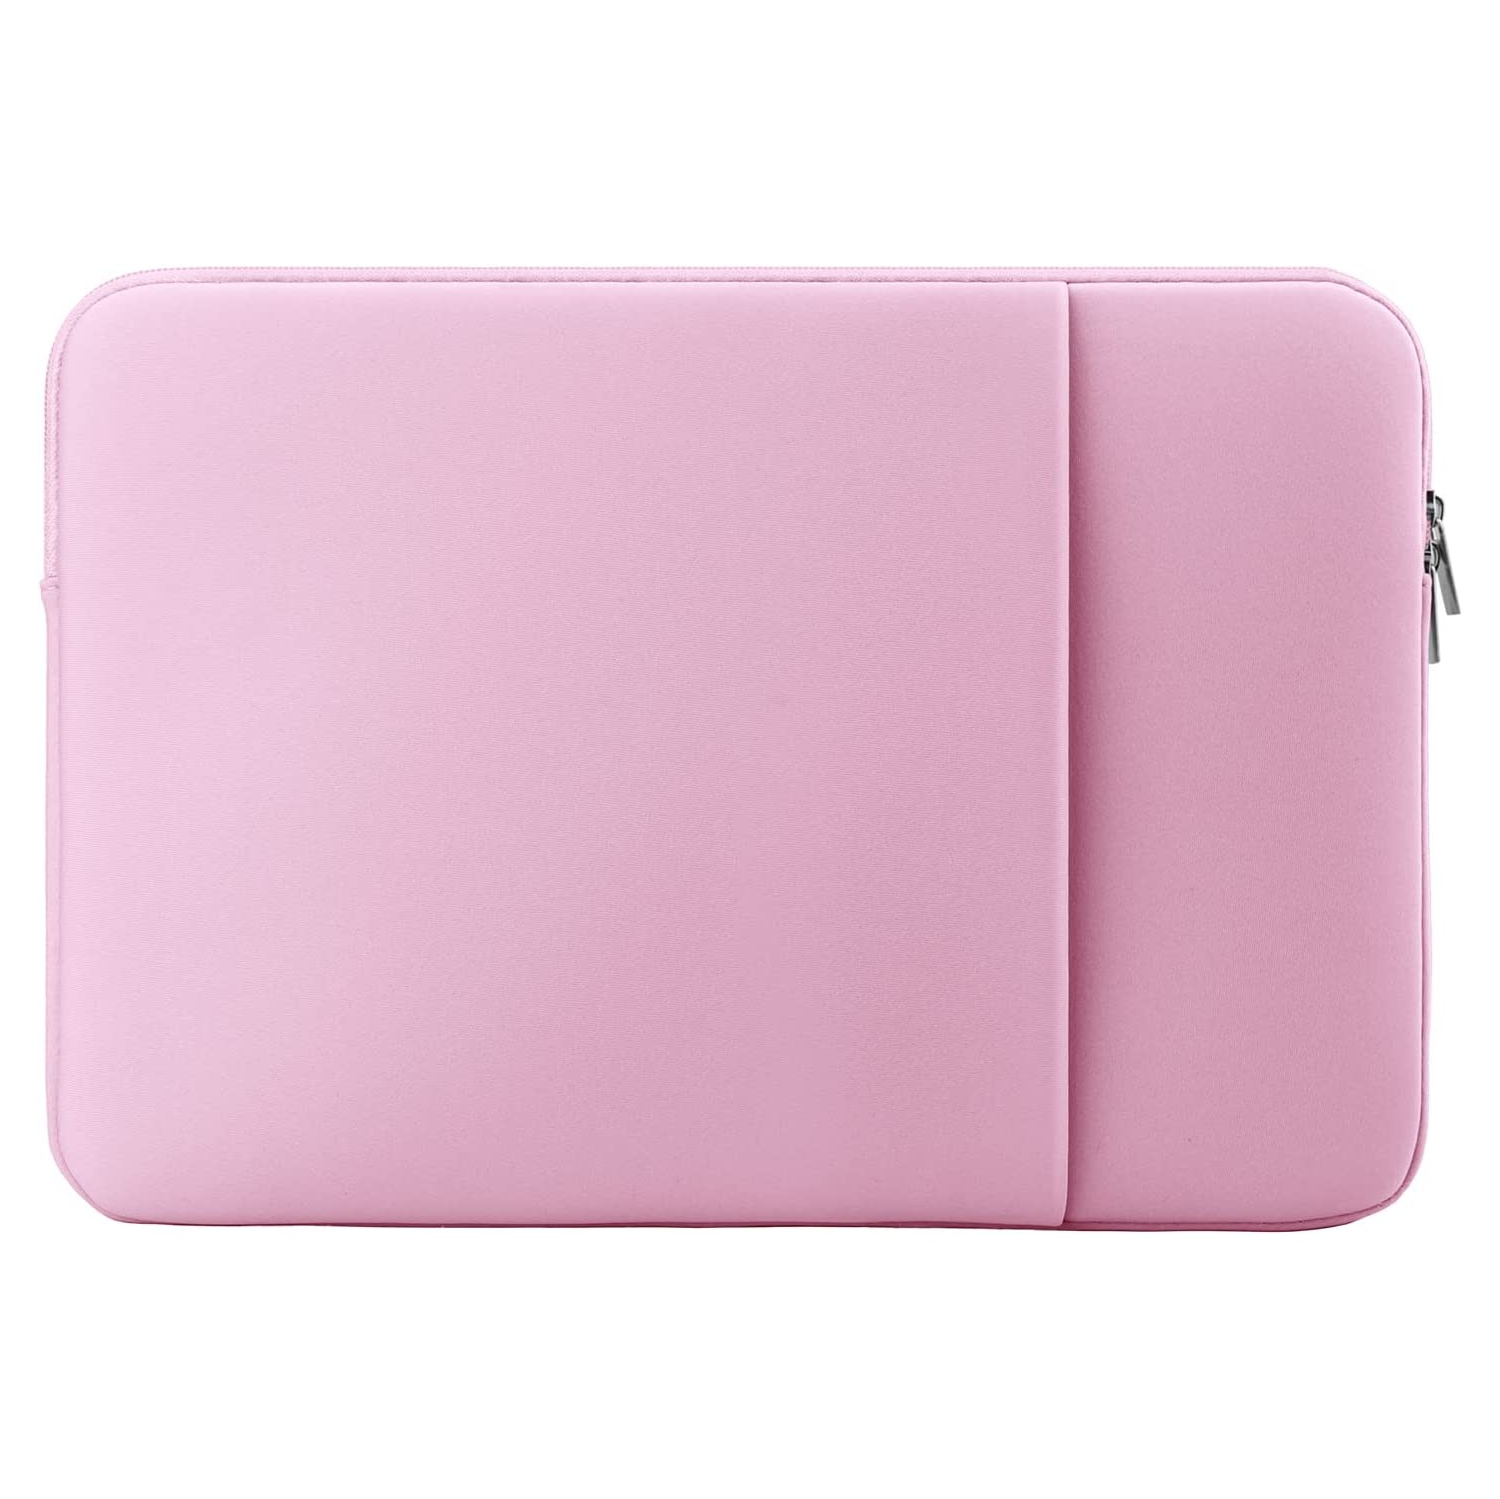 15-15.4 Inch Laptop Sleeve Shockproof Computer Case with Pocket Compatible with 15 Inch MacBook Pro